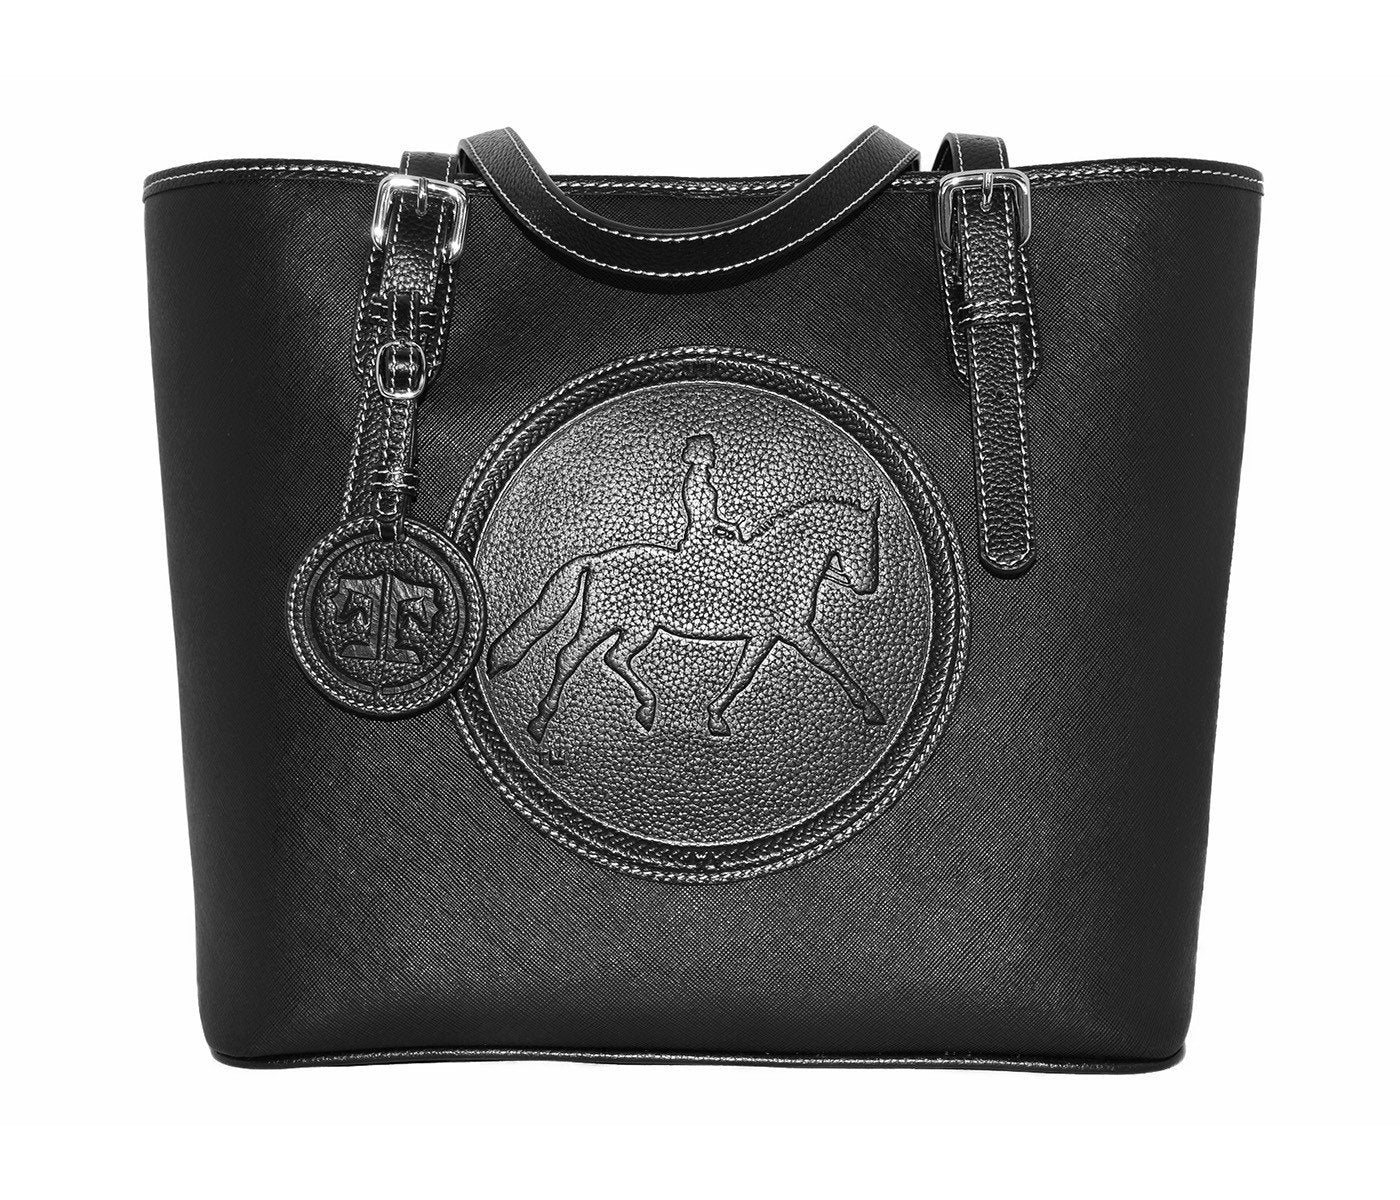 Tucker Tweed Leather Handbags Black The James River Carry All: Dressage